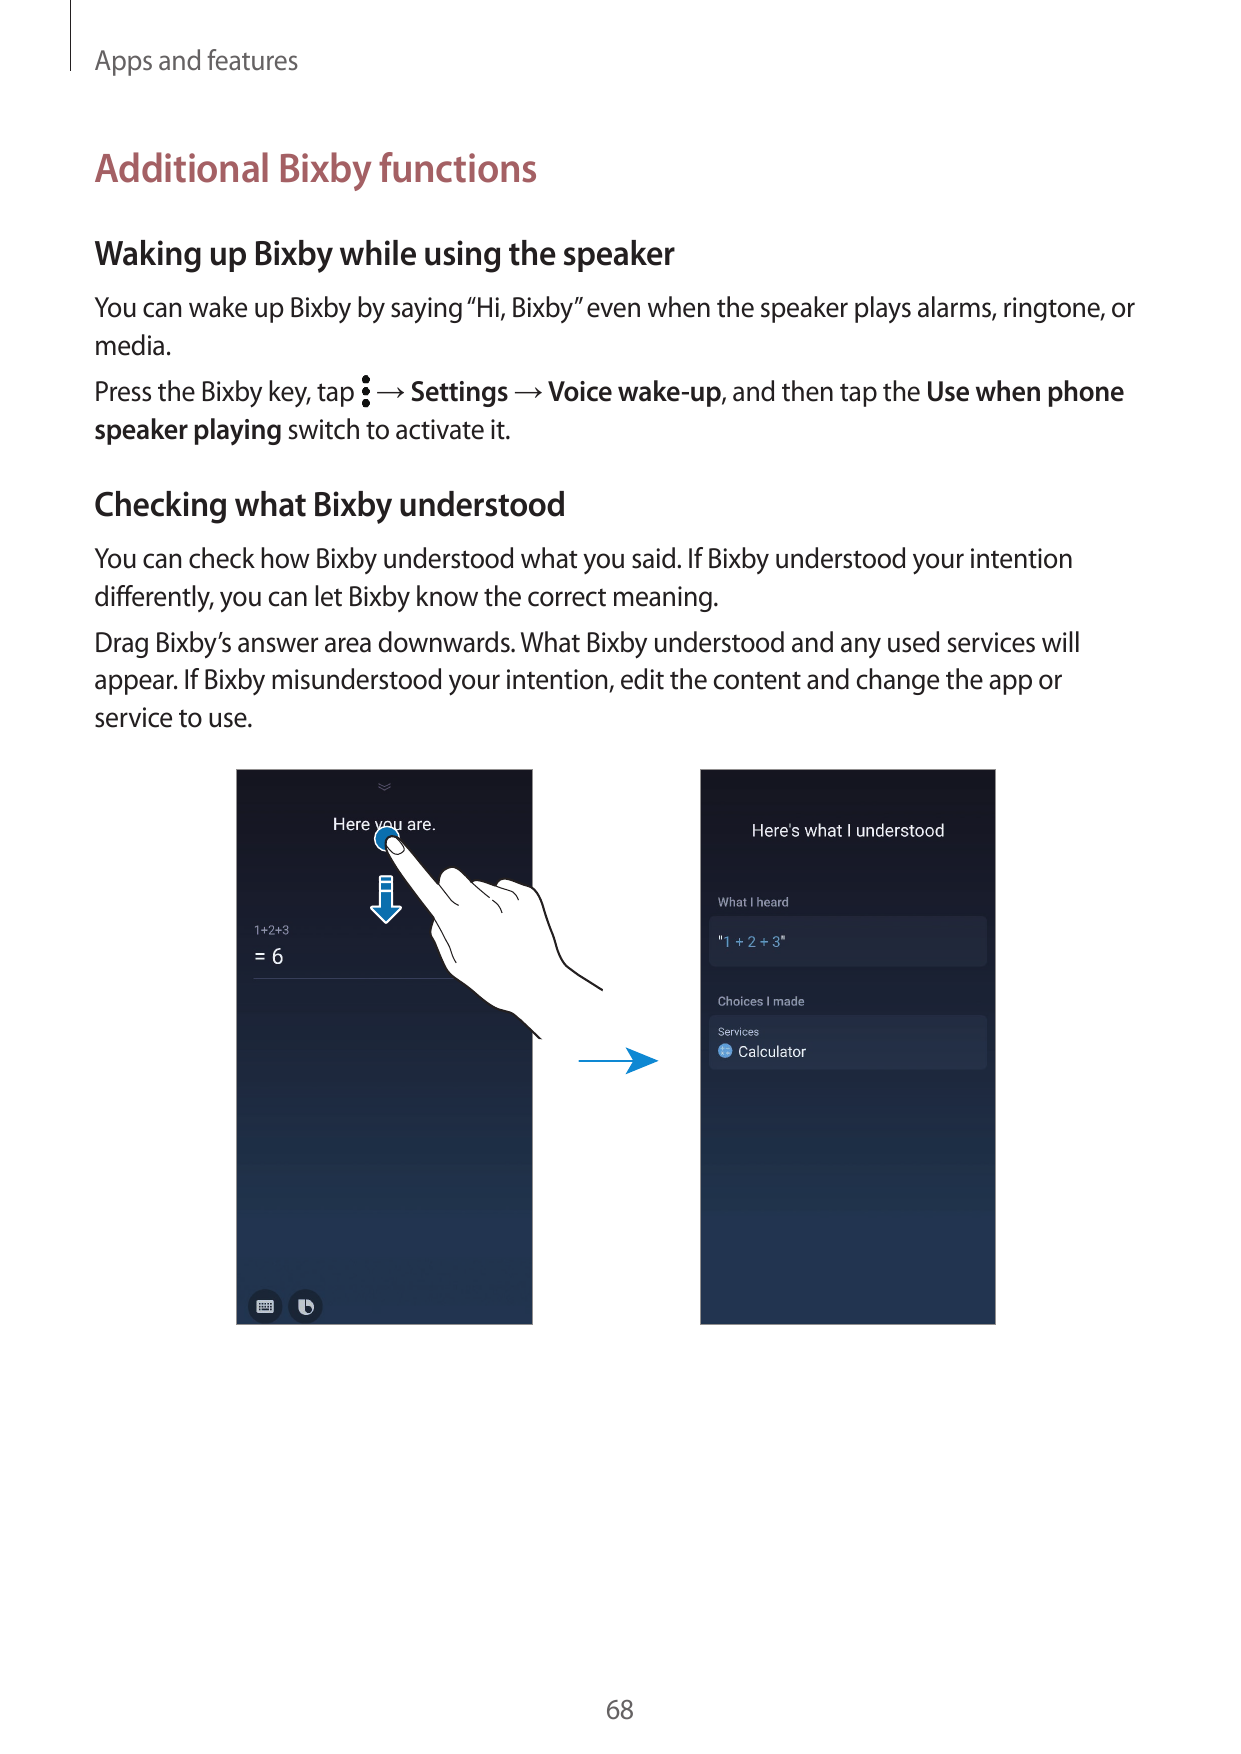 Apps and featuresAdditional Bixby functionsWaking up Bixby while using the speakerYou can wake up Bixby by saying “Hi, Bixby” ev